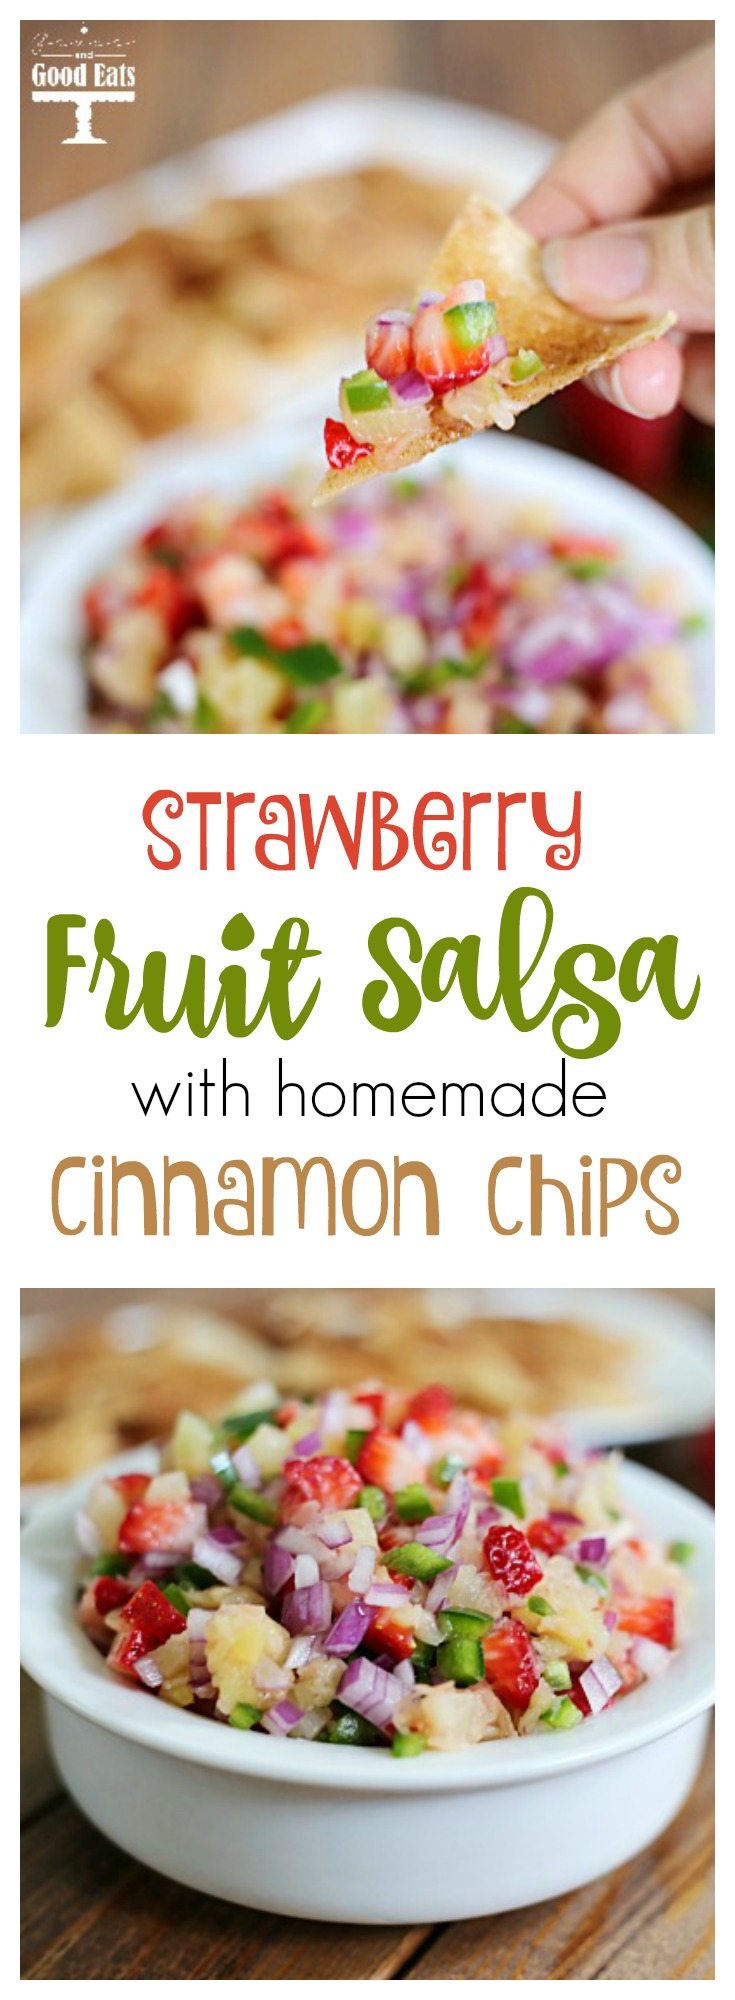 Fruit Salsa with Cinnamon Chips - Grace and Good Eats